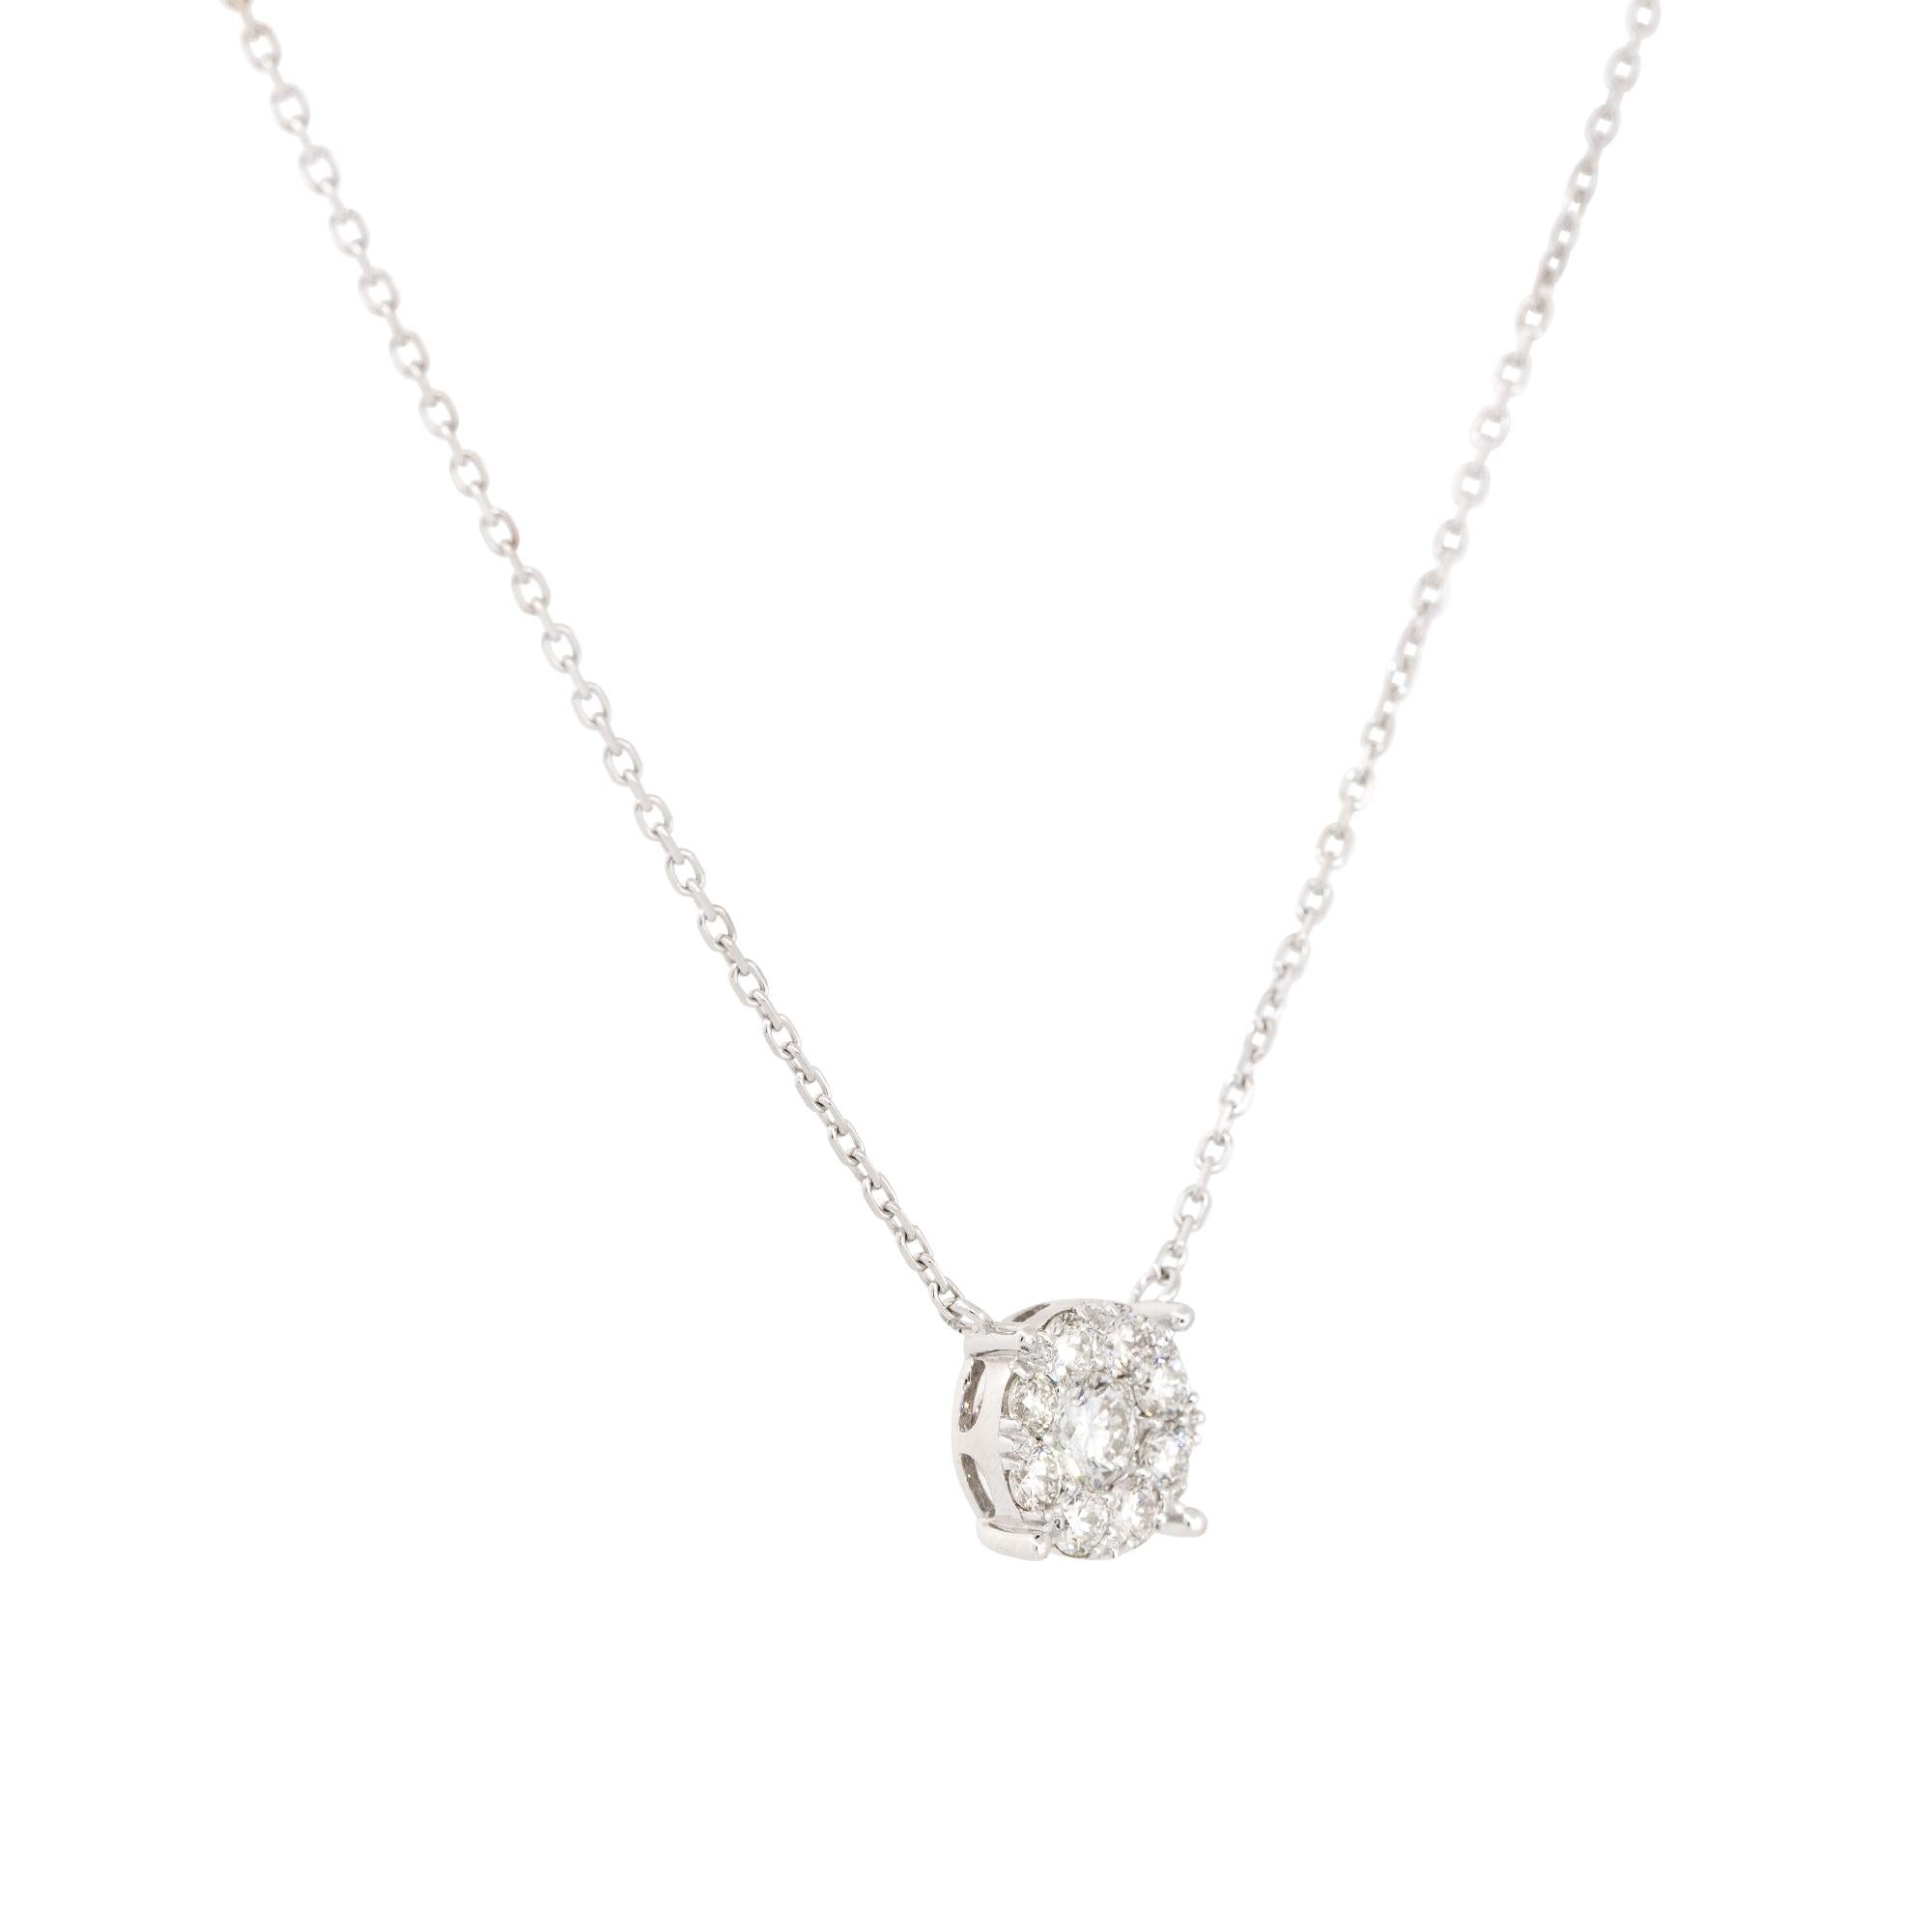 18k White Gold 0.72ctw Diamond Cluster Necklace

Material: 18k White Gold
Diamond Details: Approximately 0.72ctw of Round Cut Diamonds
Total Weight: 4.3g (2.8dwt)
Additional Details: This item comes with a presentation box!
SKU: G12912